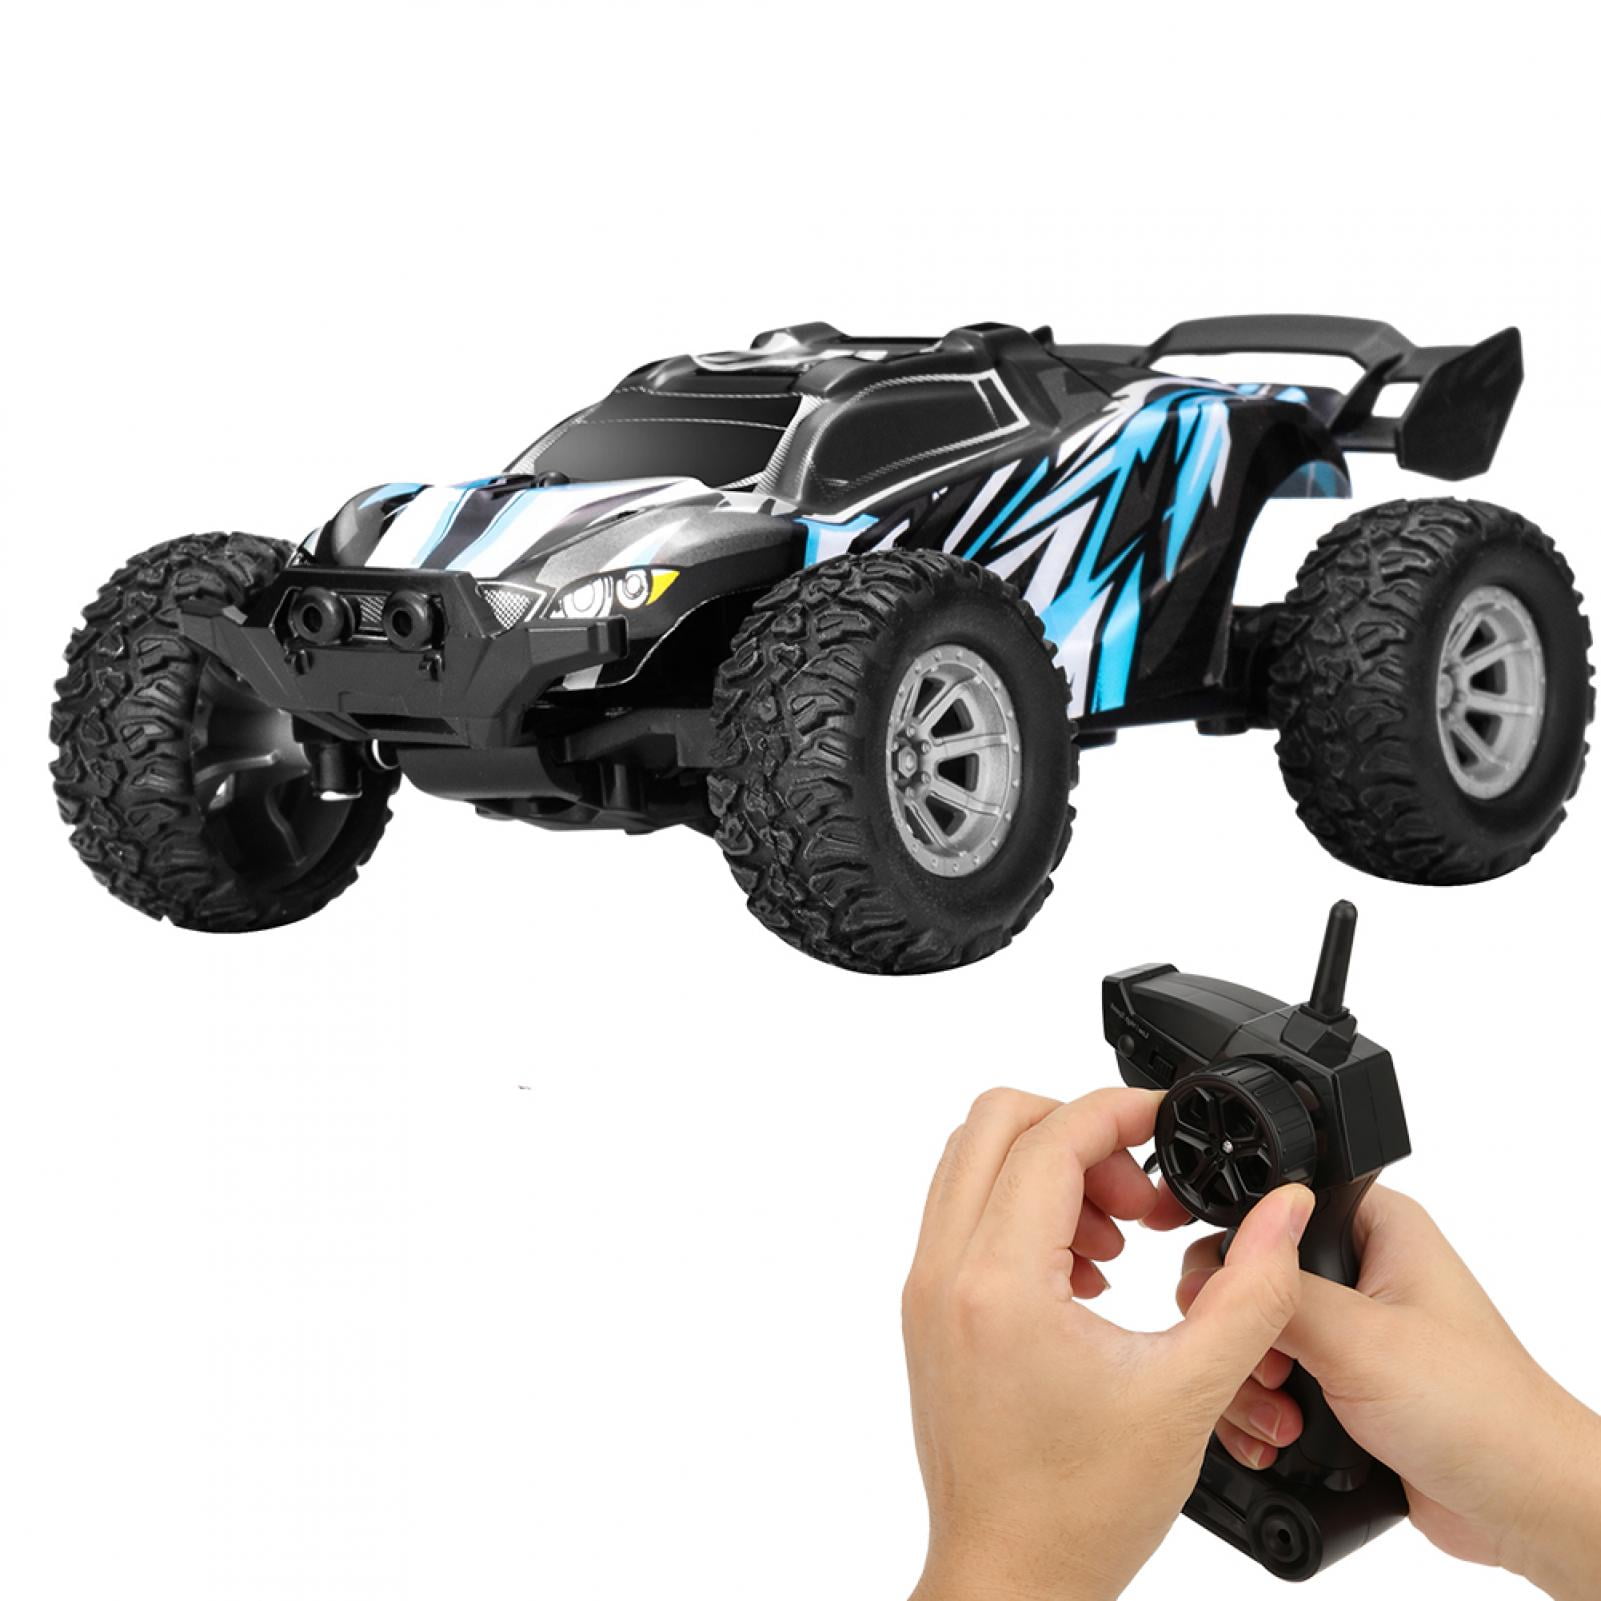 Details about   1:32 Mini High Speed 2WD RC Car 2.4G  Remote Control Car Kids Toy